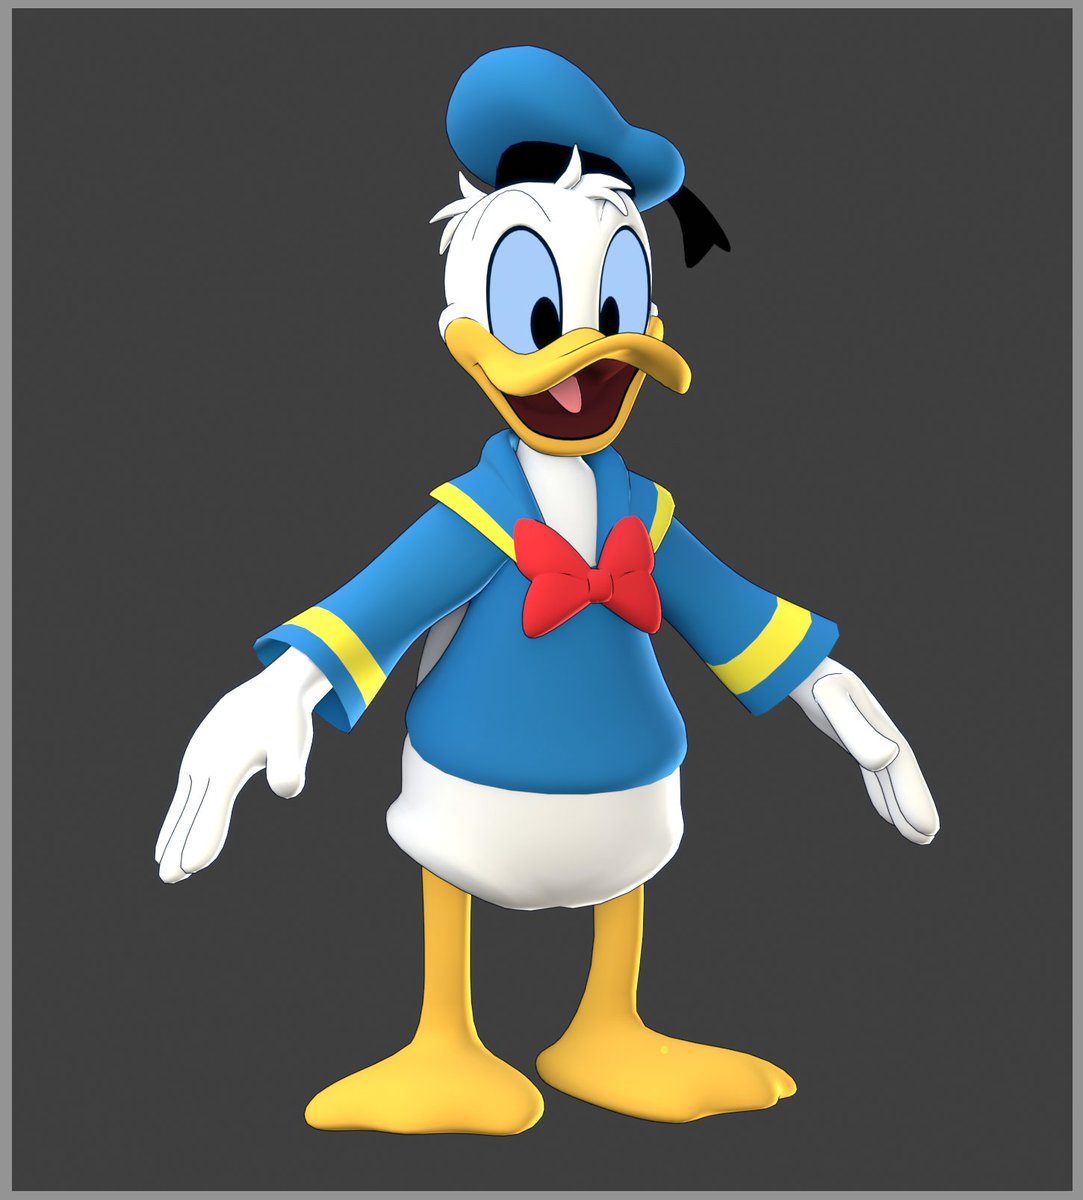 Oh boy! 
A 3D model of Donald Duck?! You bet!

Here's my 3D model preview of Donald Duck from the Mickey Mouse series.
#MickeyMouse #animation #Blender3D